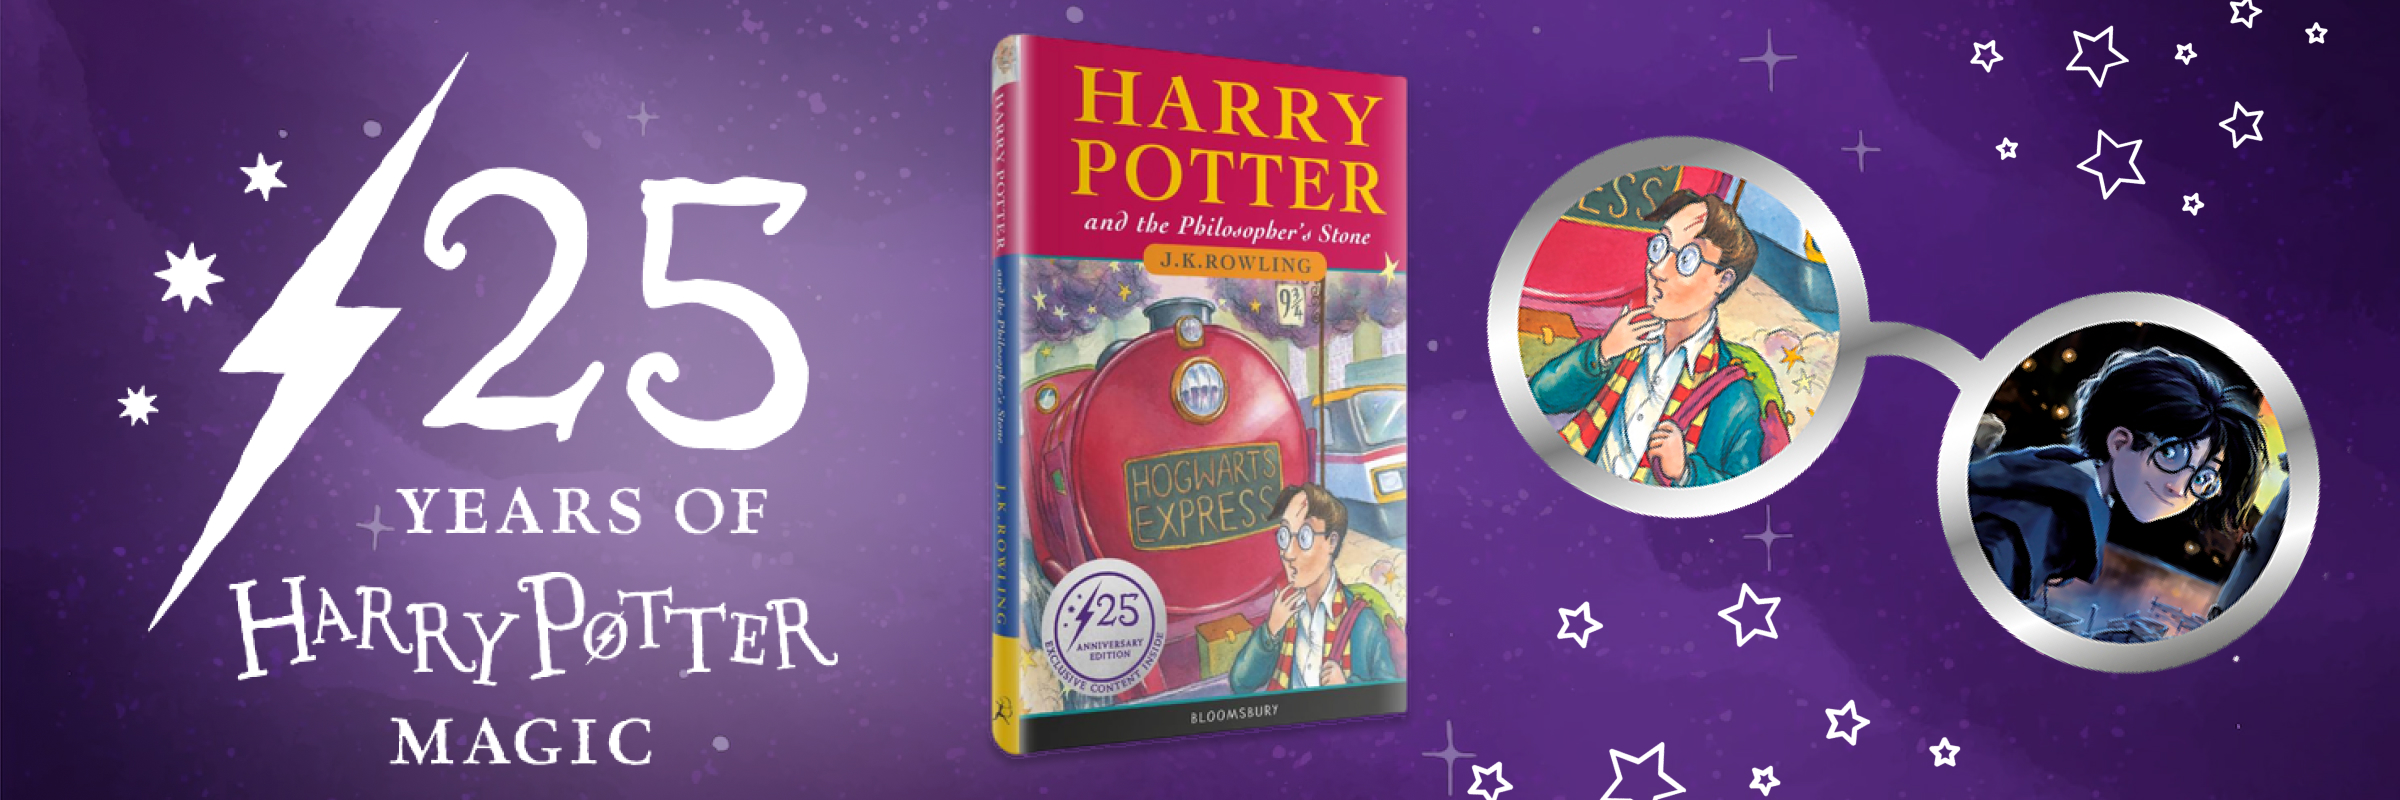 Harry Potter and the Philosopher's Stone (25th Anniversary Edition)